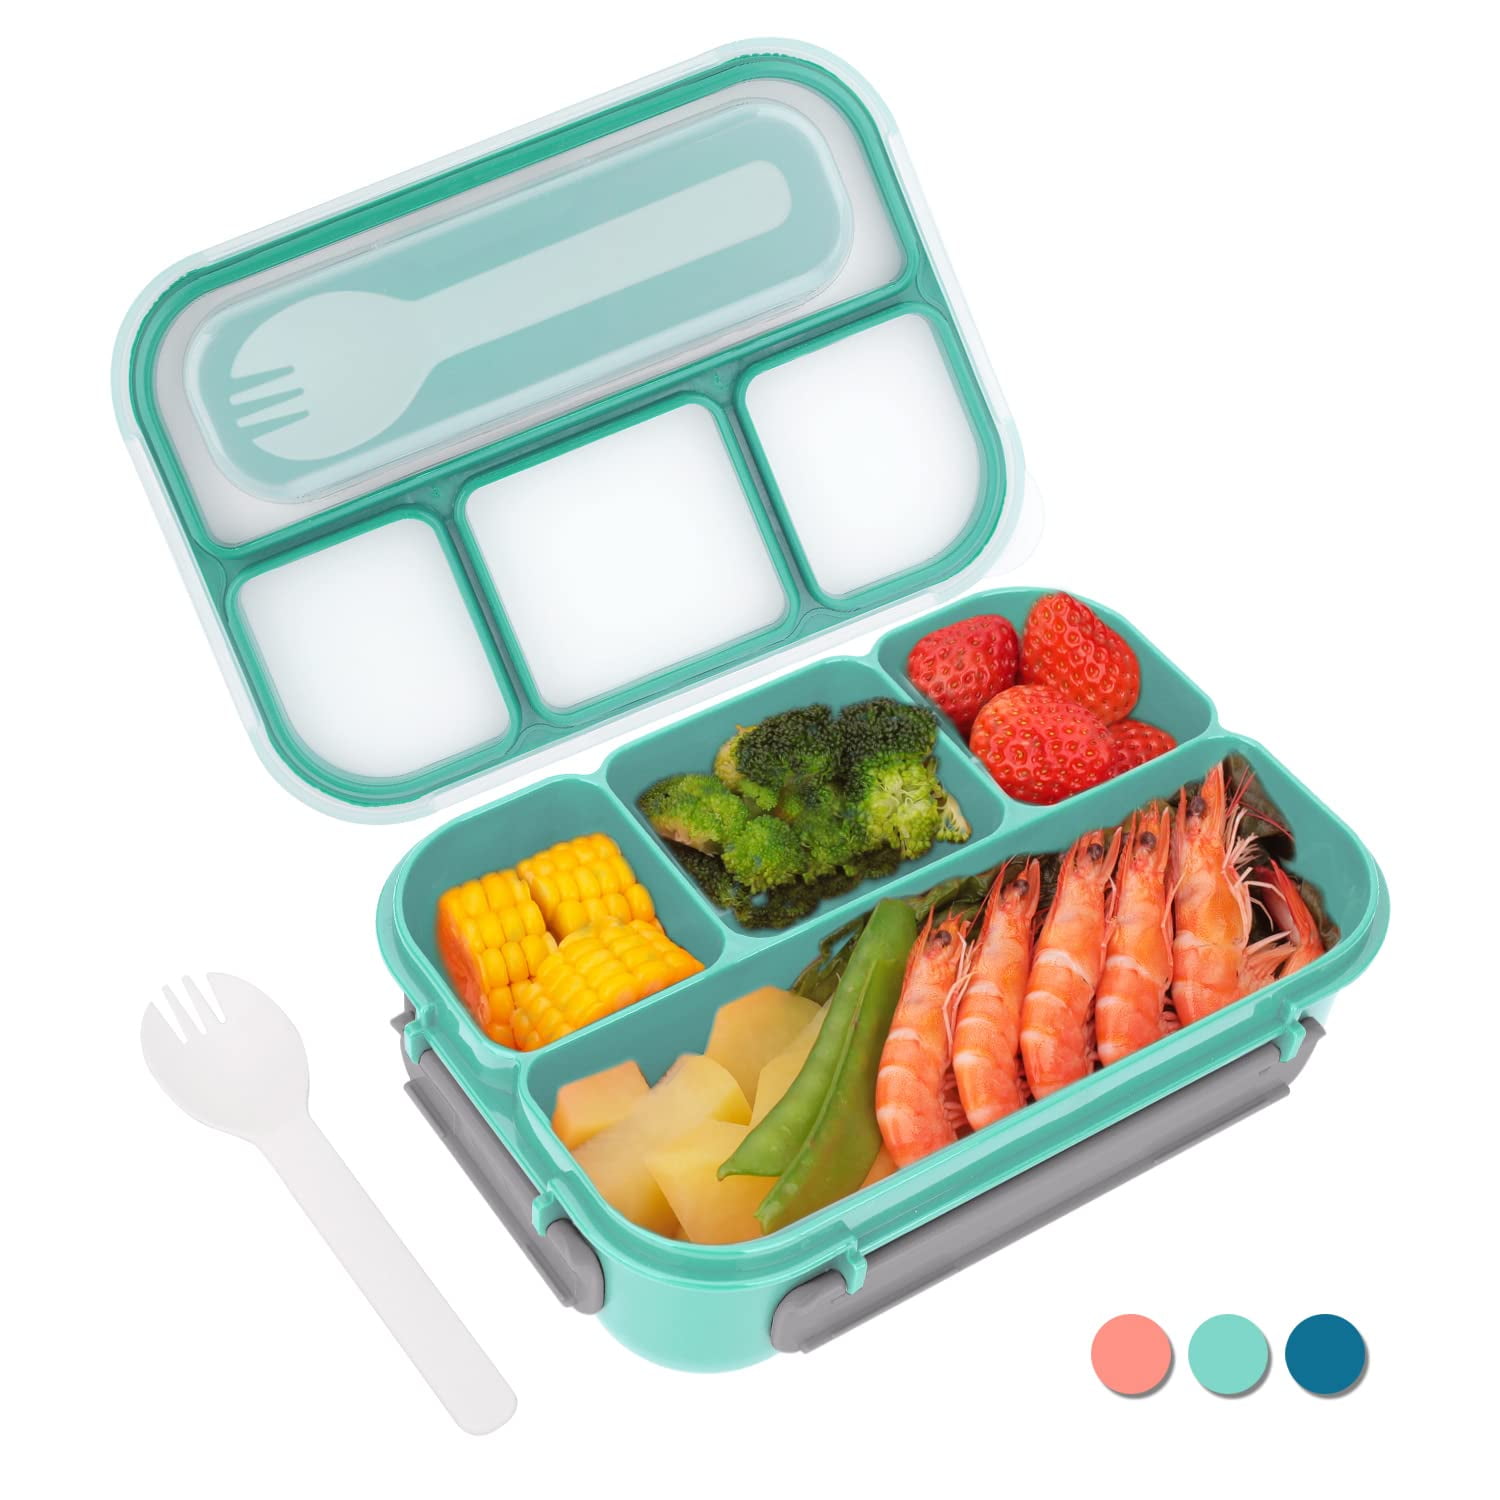 LOVINA Bento Box for Adult Kids, Stylish Teens Adult Lunch Box Containers  With 5 Compartments, Durab…See more LOVINA Bento Box for Adult Kids,  Stylish